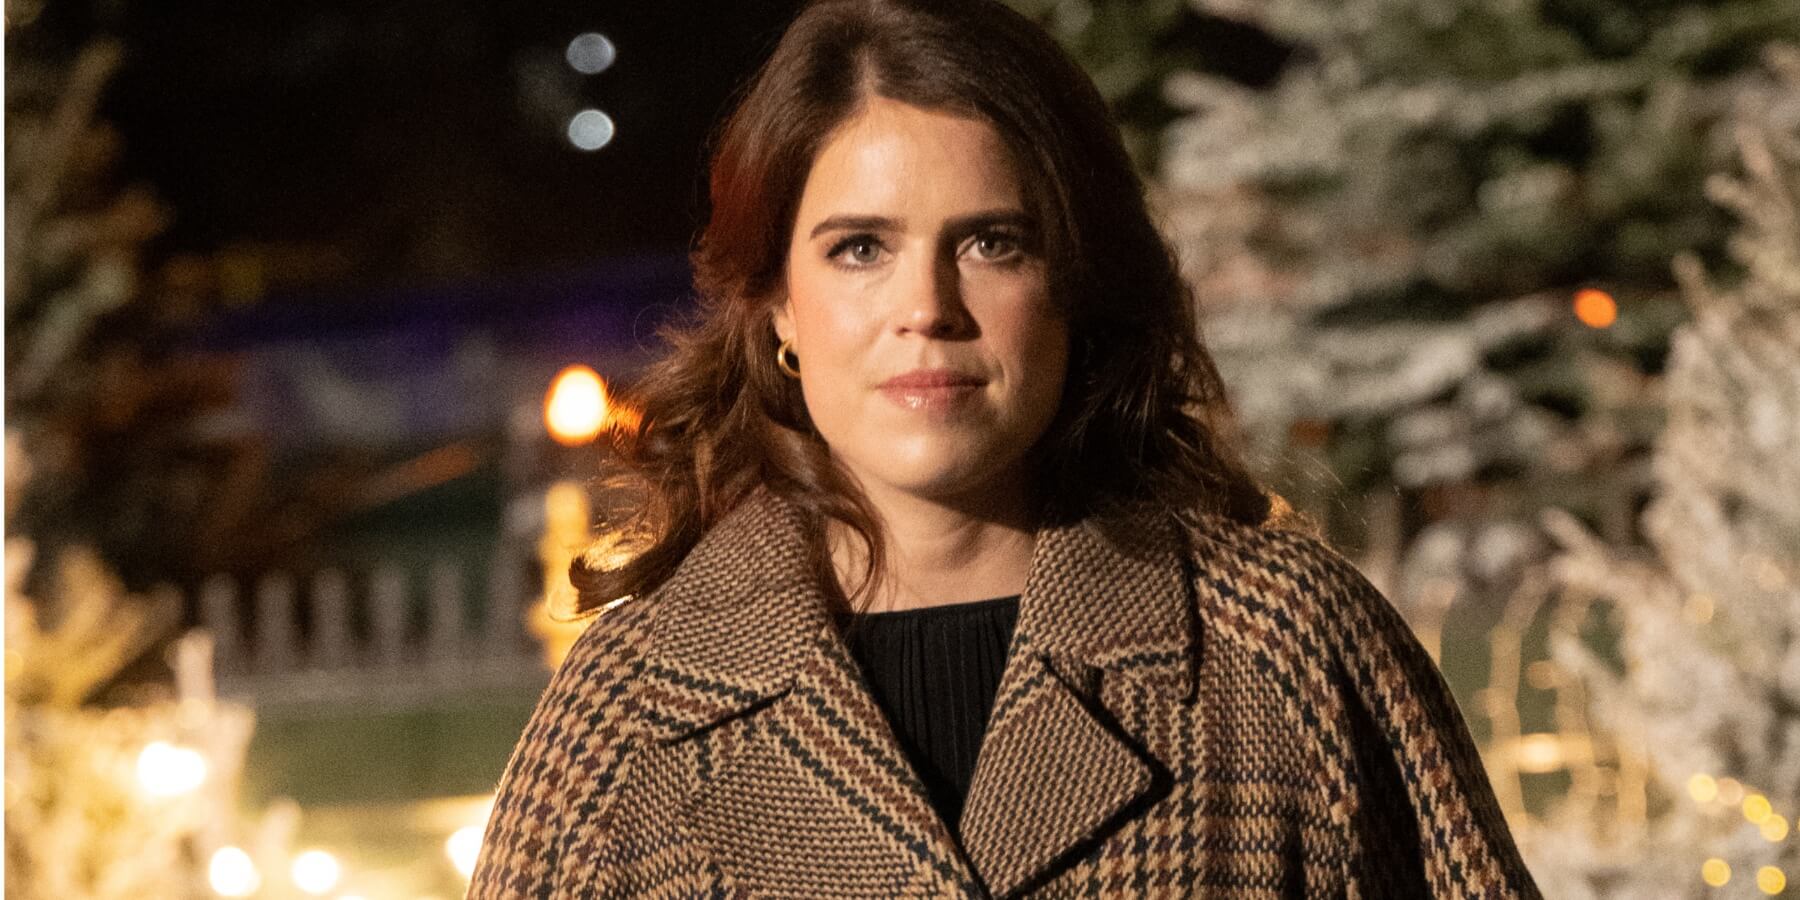 Princess Eugenie photographed in 2022 at the 'Together at Christmas' Carol Service at Westminster Abbey on December 15, 2022 in London, England.